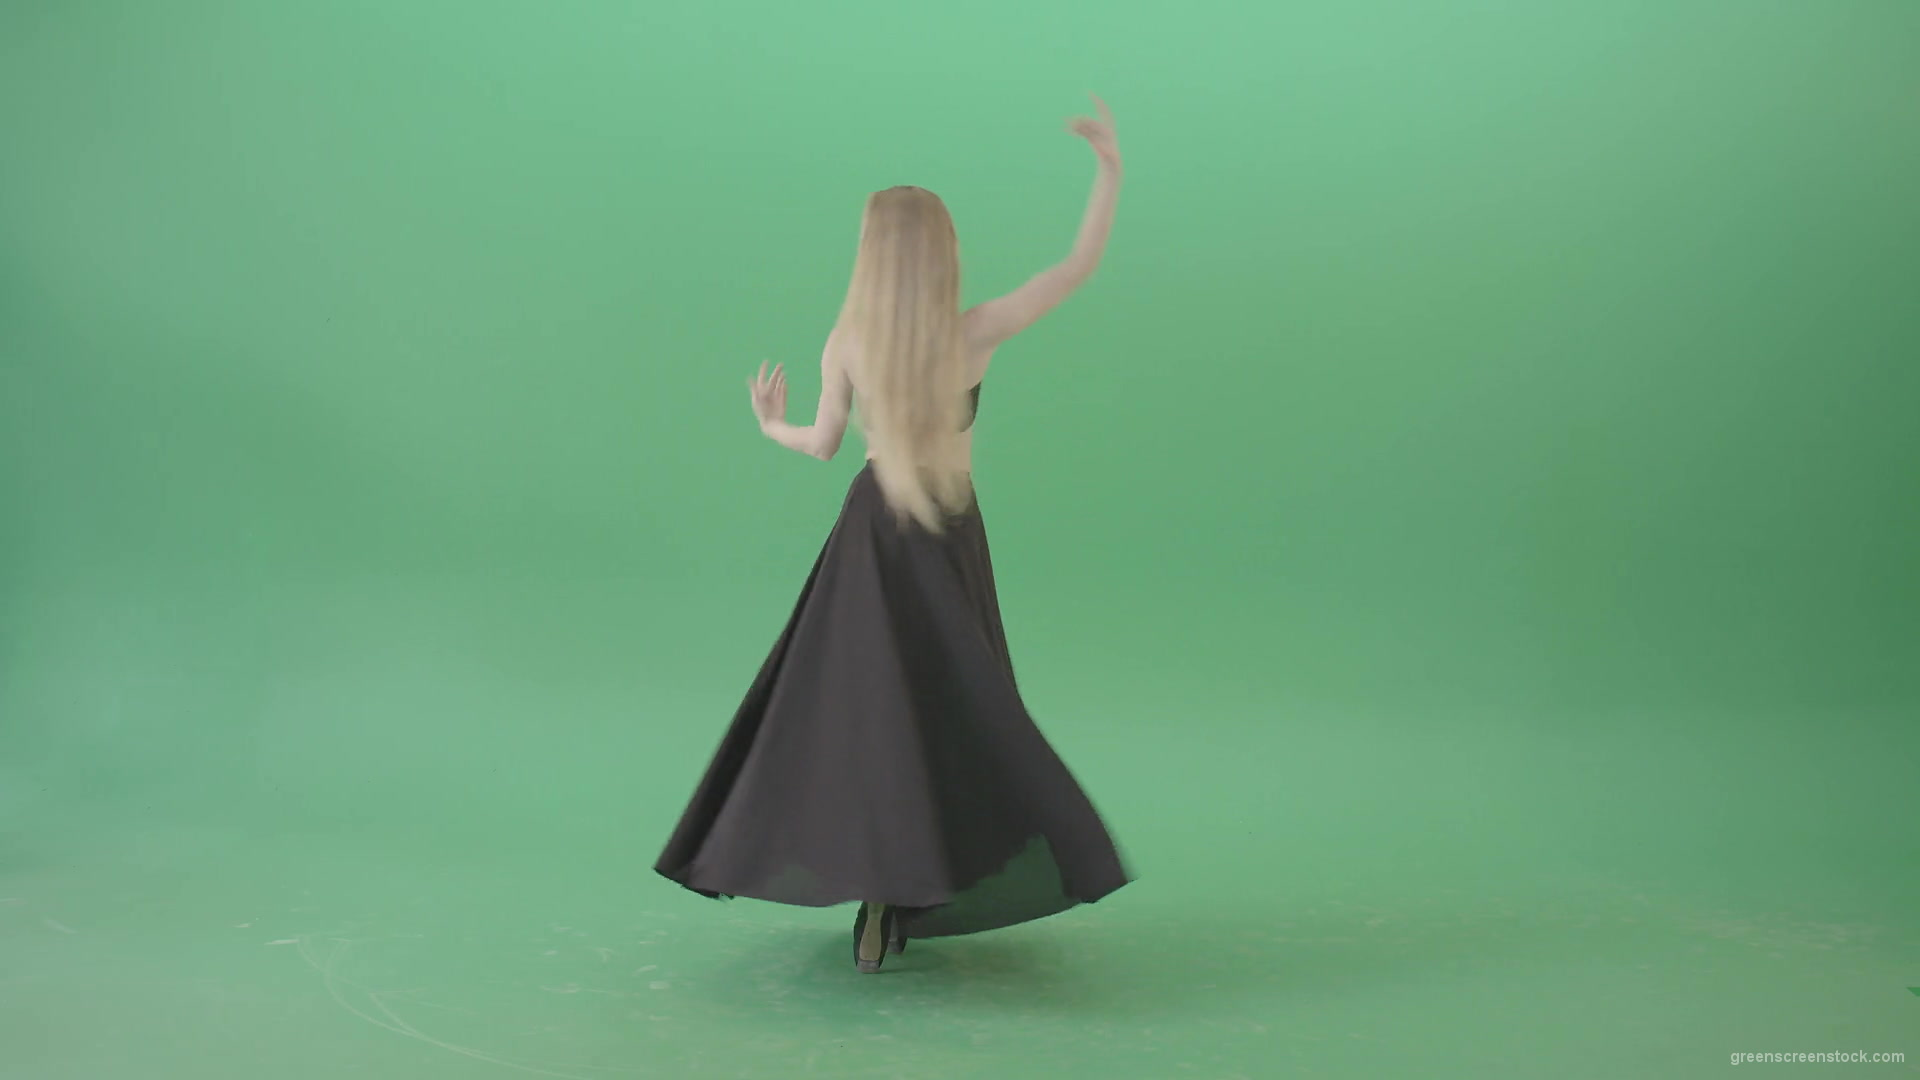 Dancing-in-the-shadow-spinning-on-the-green-screen-ballet-art-by-dancing-girl-4K-Video-Footage-1920_008 Green Screen Stock